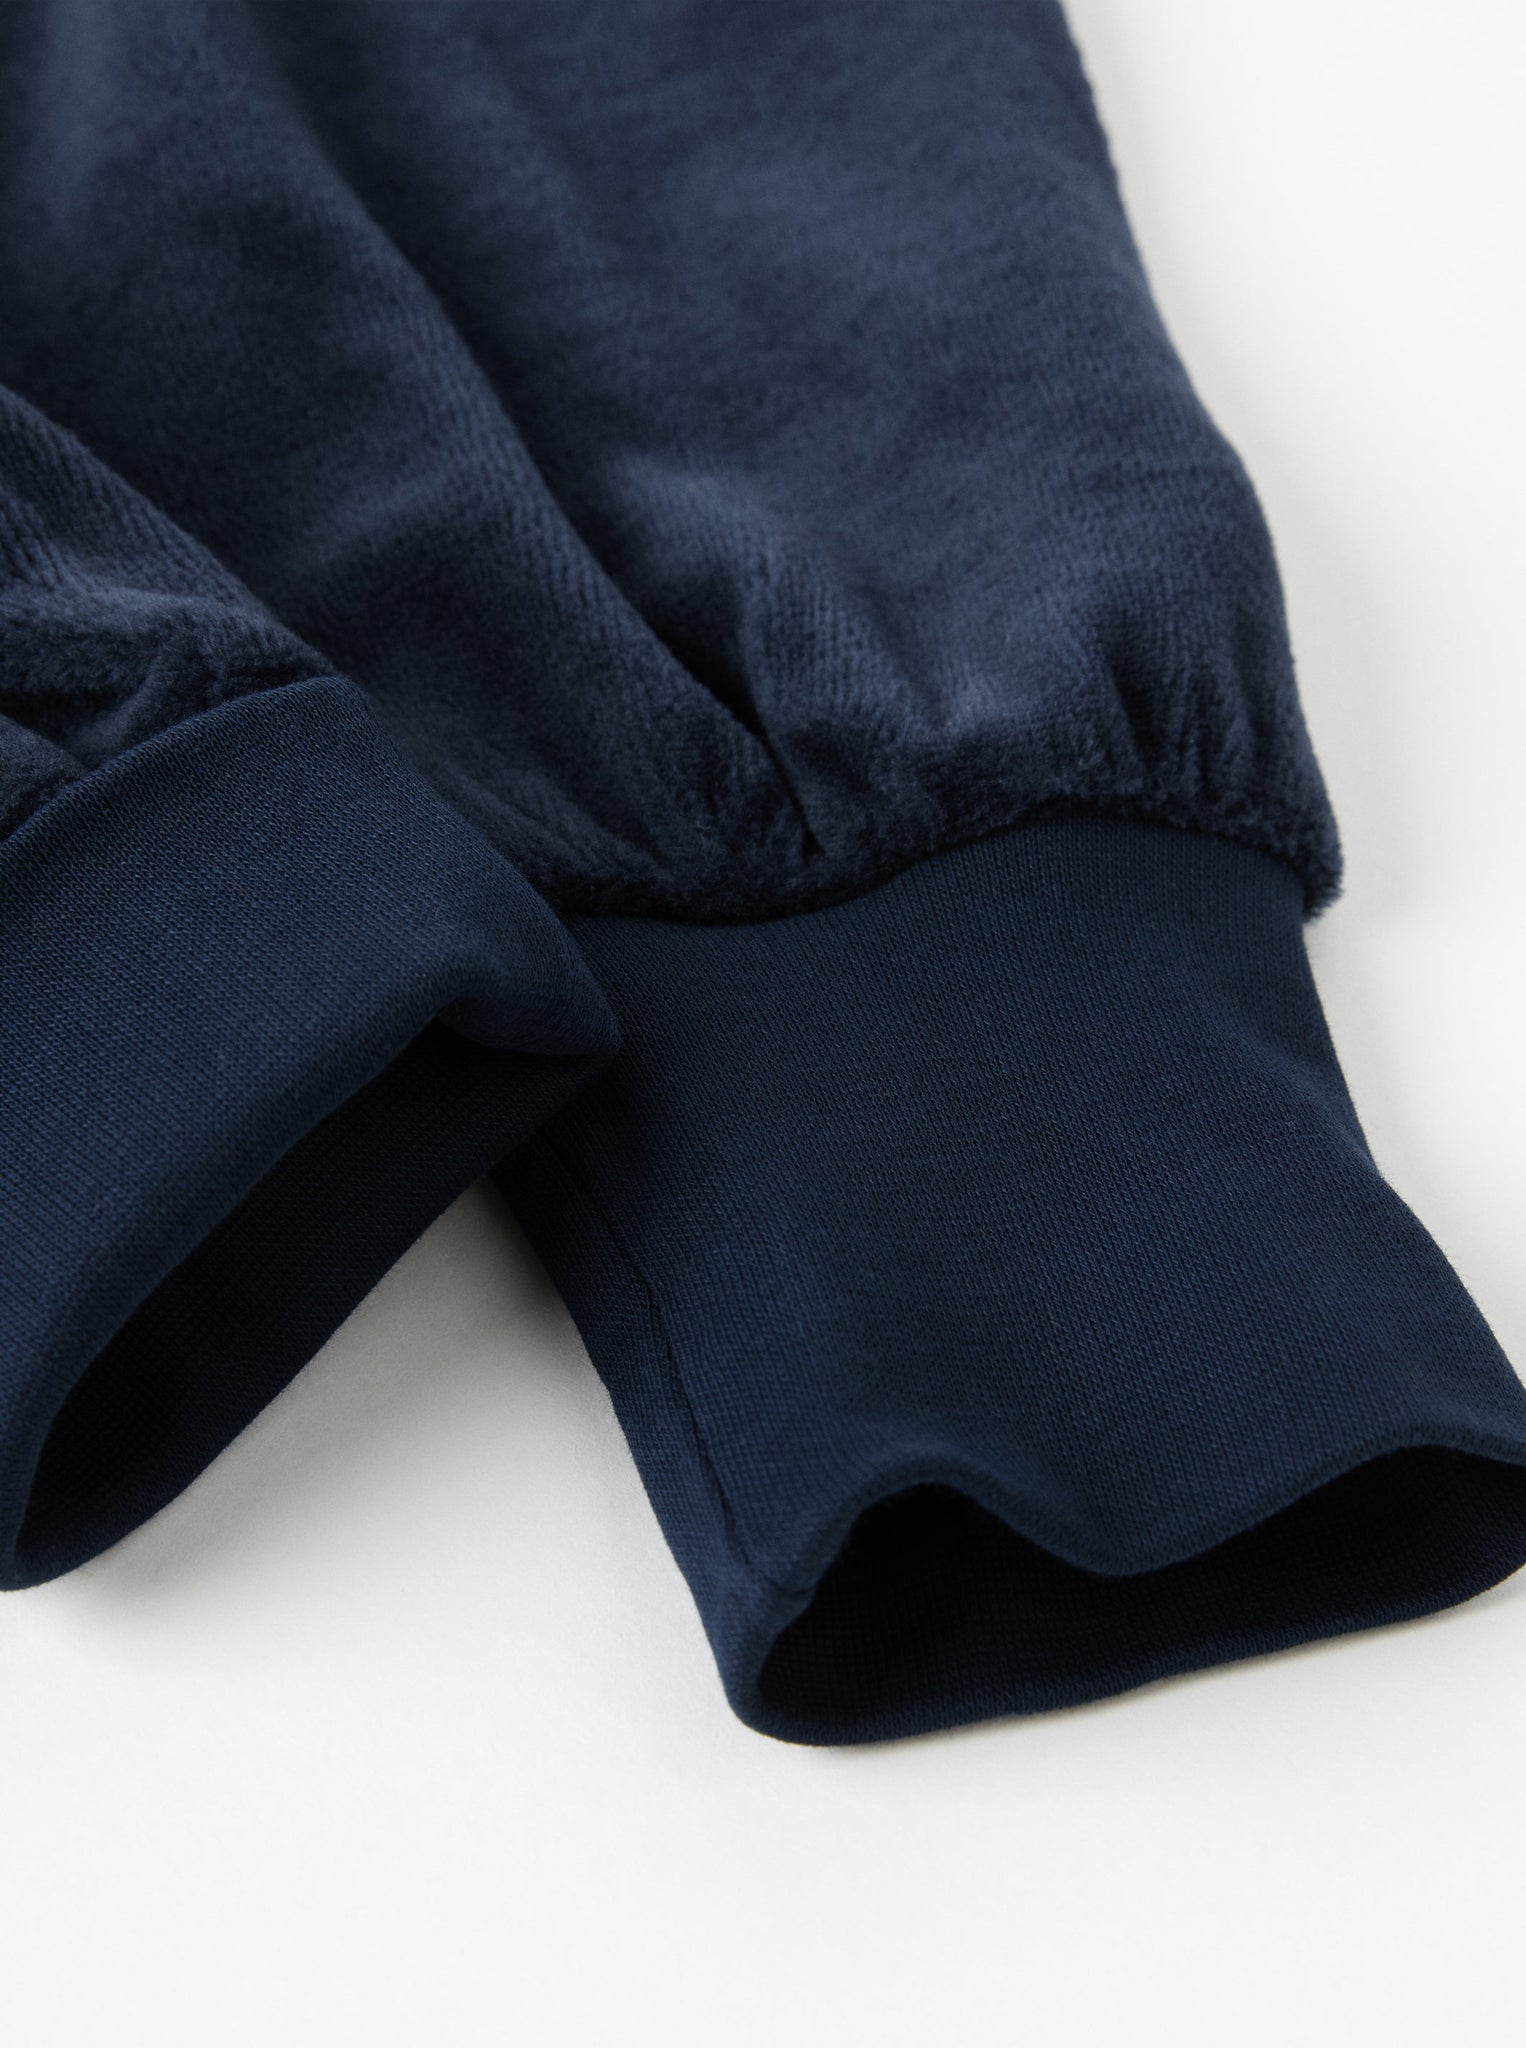 Organic Cotton Velour Baby Leggings from the Polarn O. Pyret baby collection. Made using 100% GOTS Organic Cotton